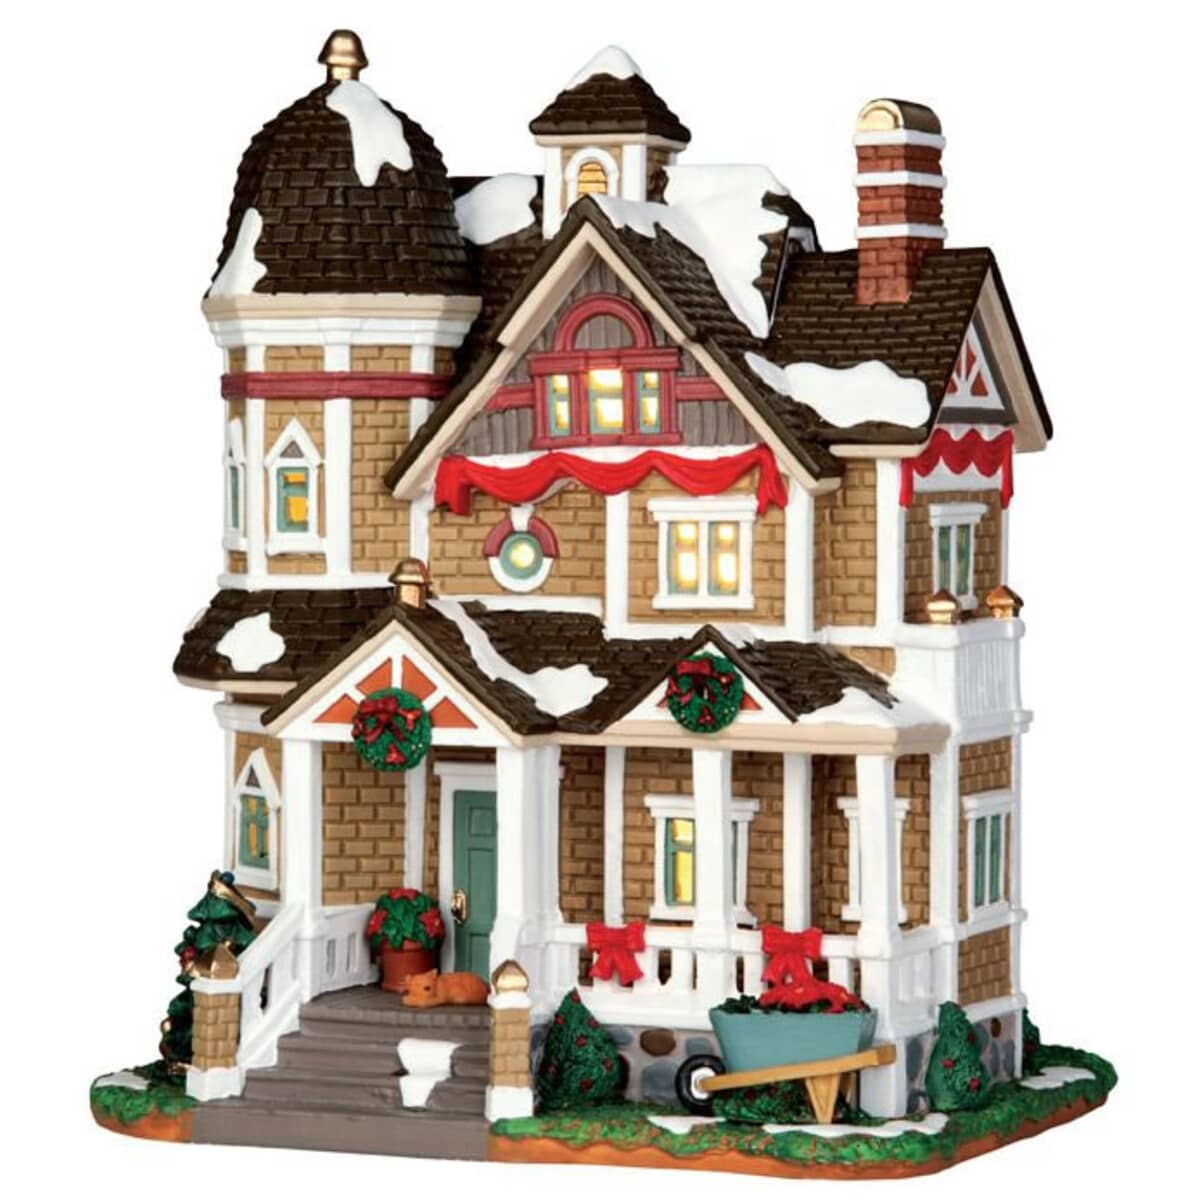 Lemax Christmas Village The Williams House - 45689 - (45689) - £43.49 ...